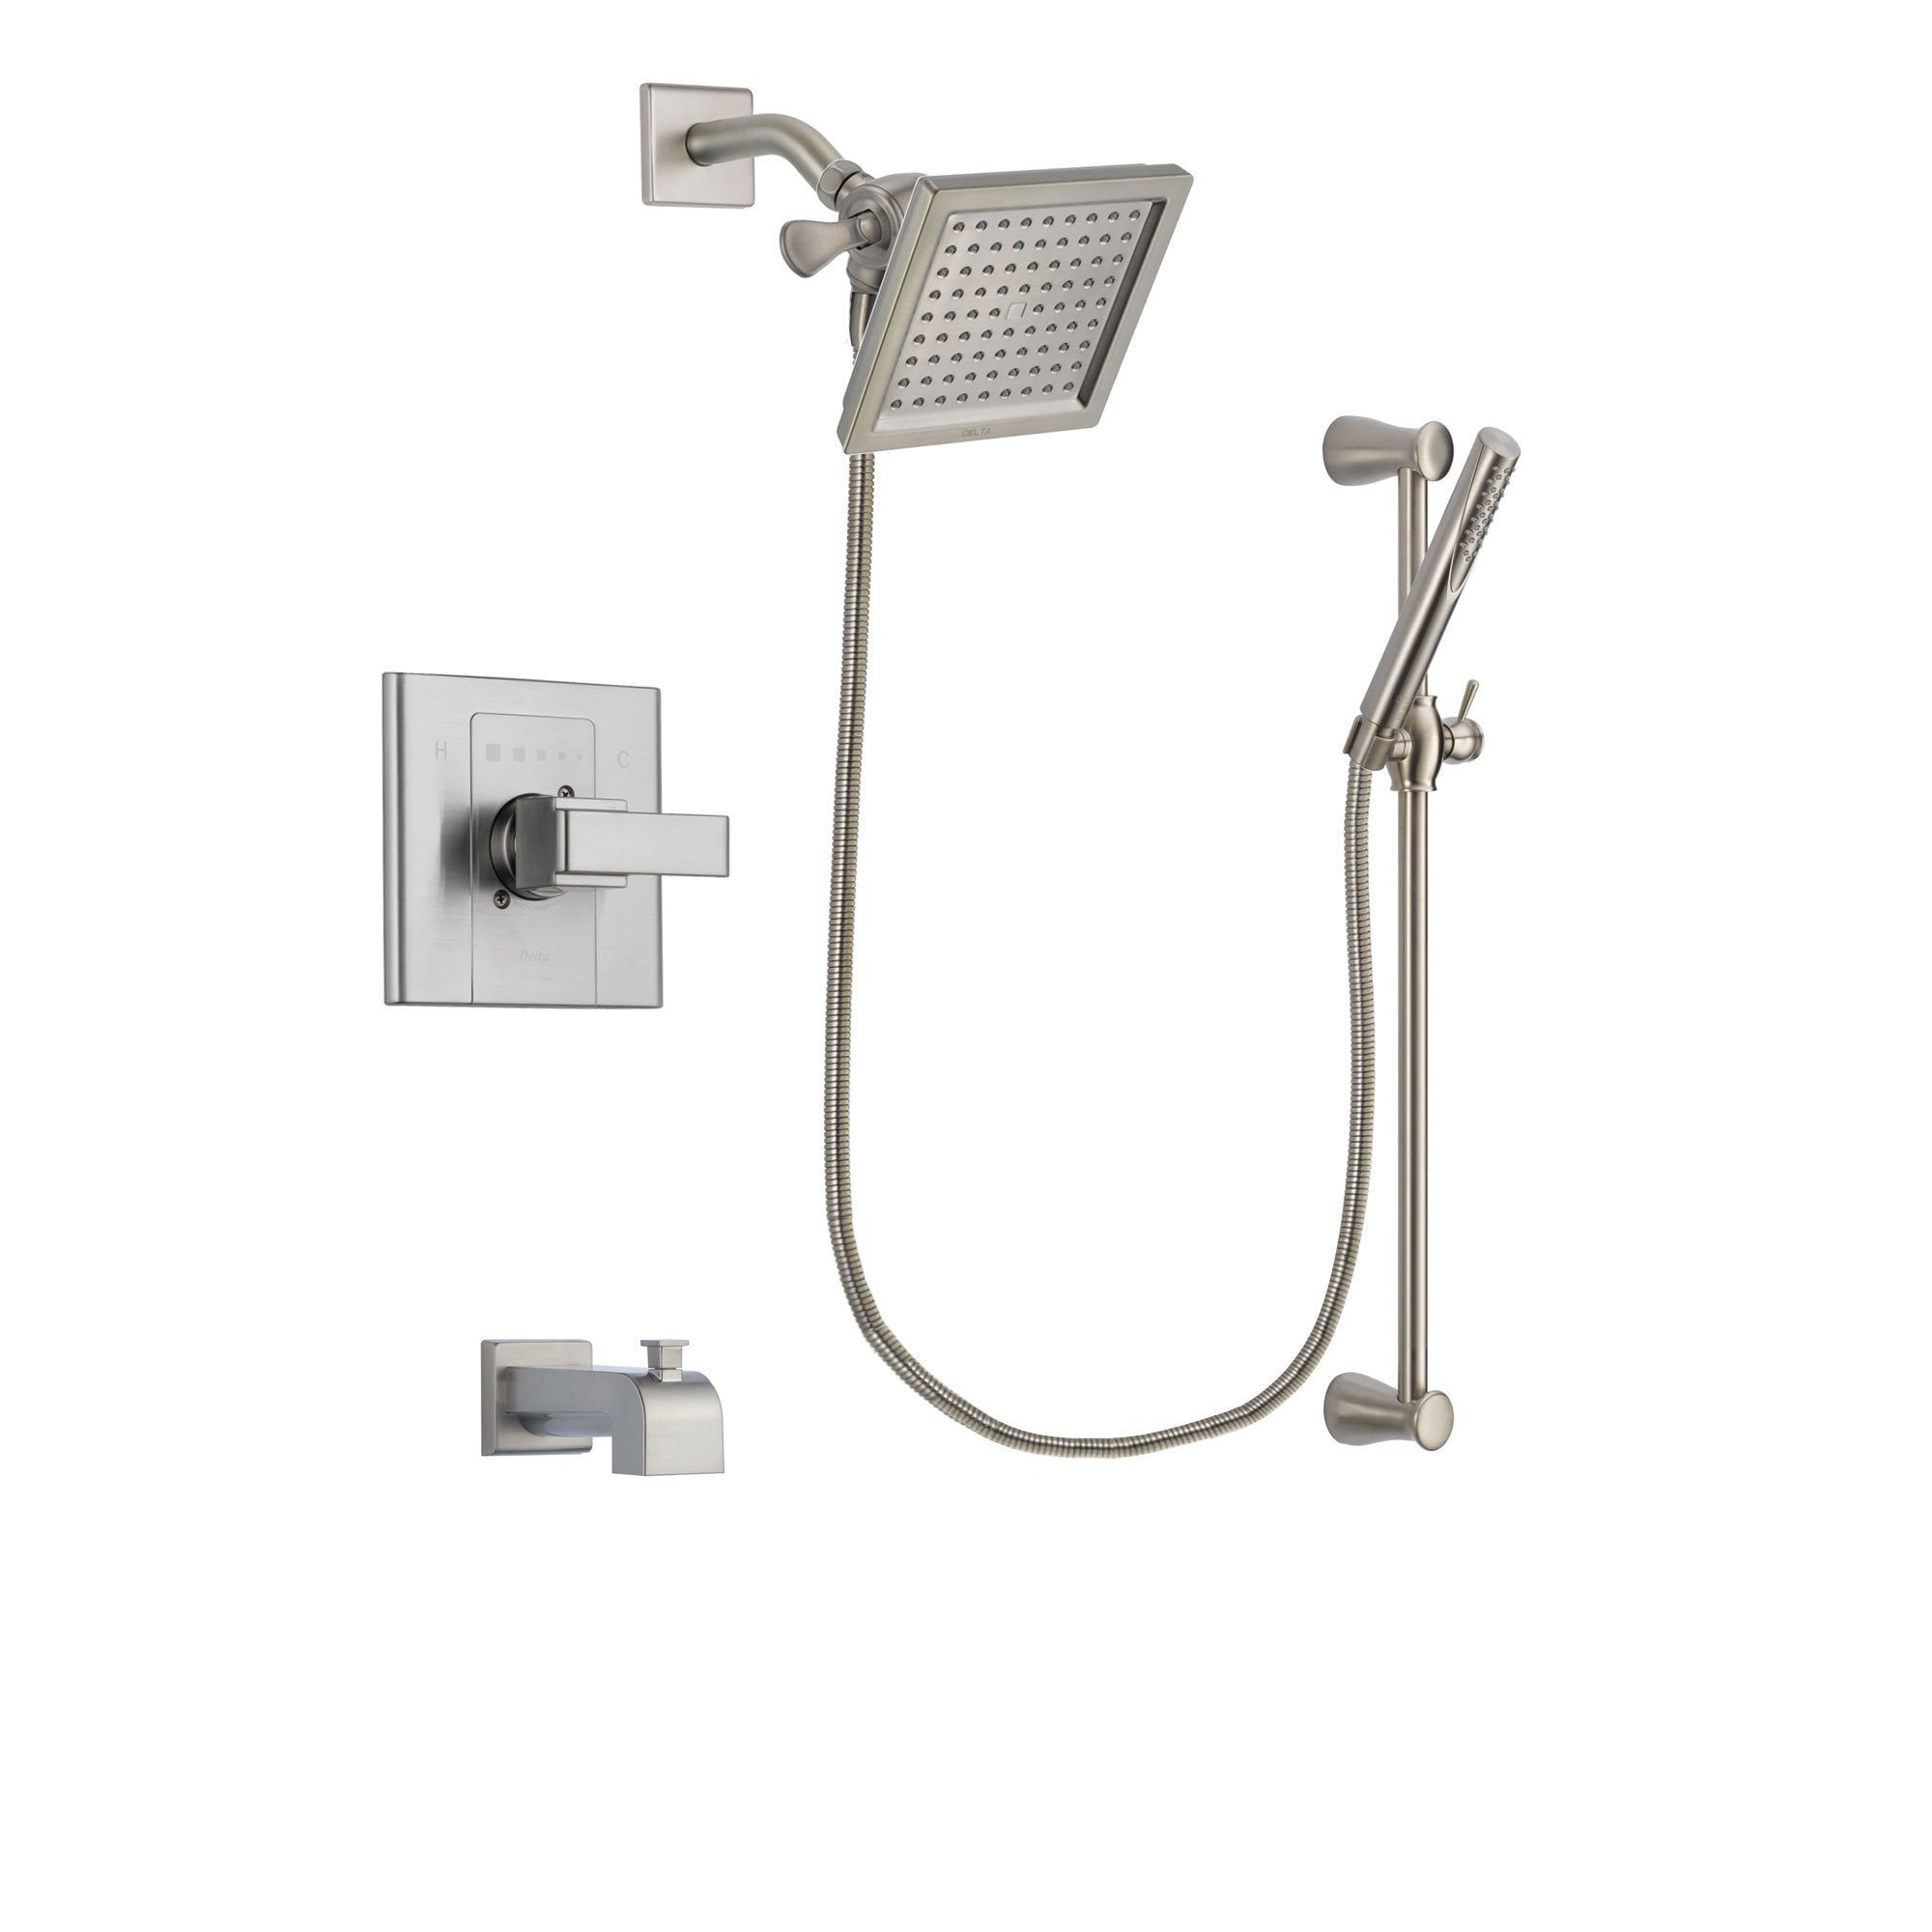 Delta Arzo Stainless Steel Finish Tub and Shower Faucet System Package with 6.5-inch Square Rain Showerhead and Handheld Shower Spray with Slide Bar Includes Rough-in Valve and Tub Spout DSP2301V